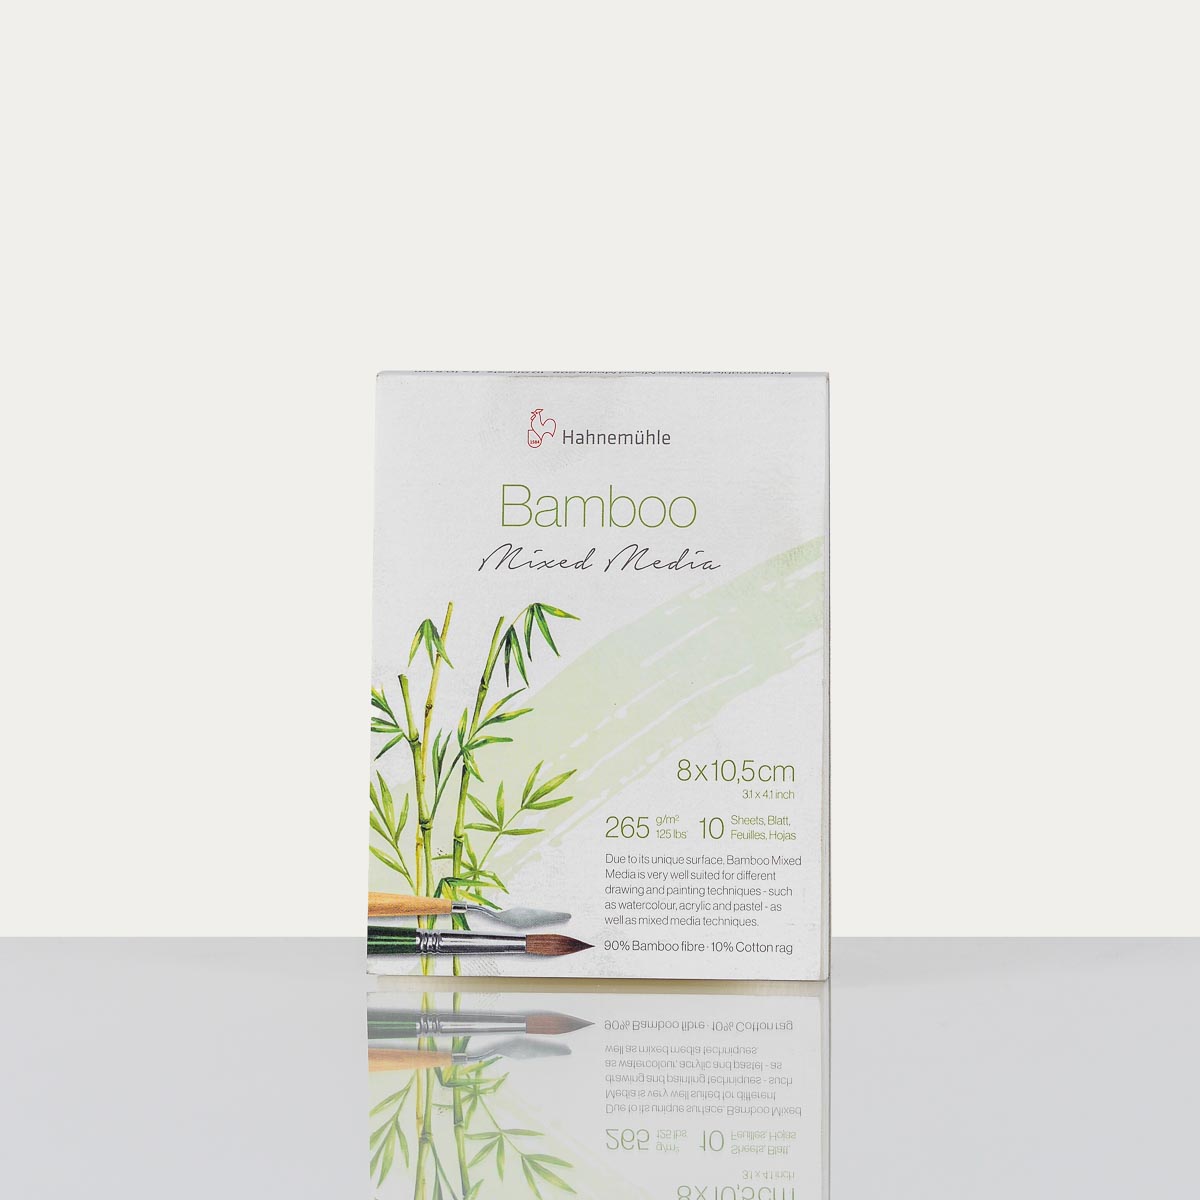 Traditional Hahnemuhle Bamboo MiniPad 265gsm 80x105mm (10 Sheets)